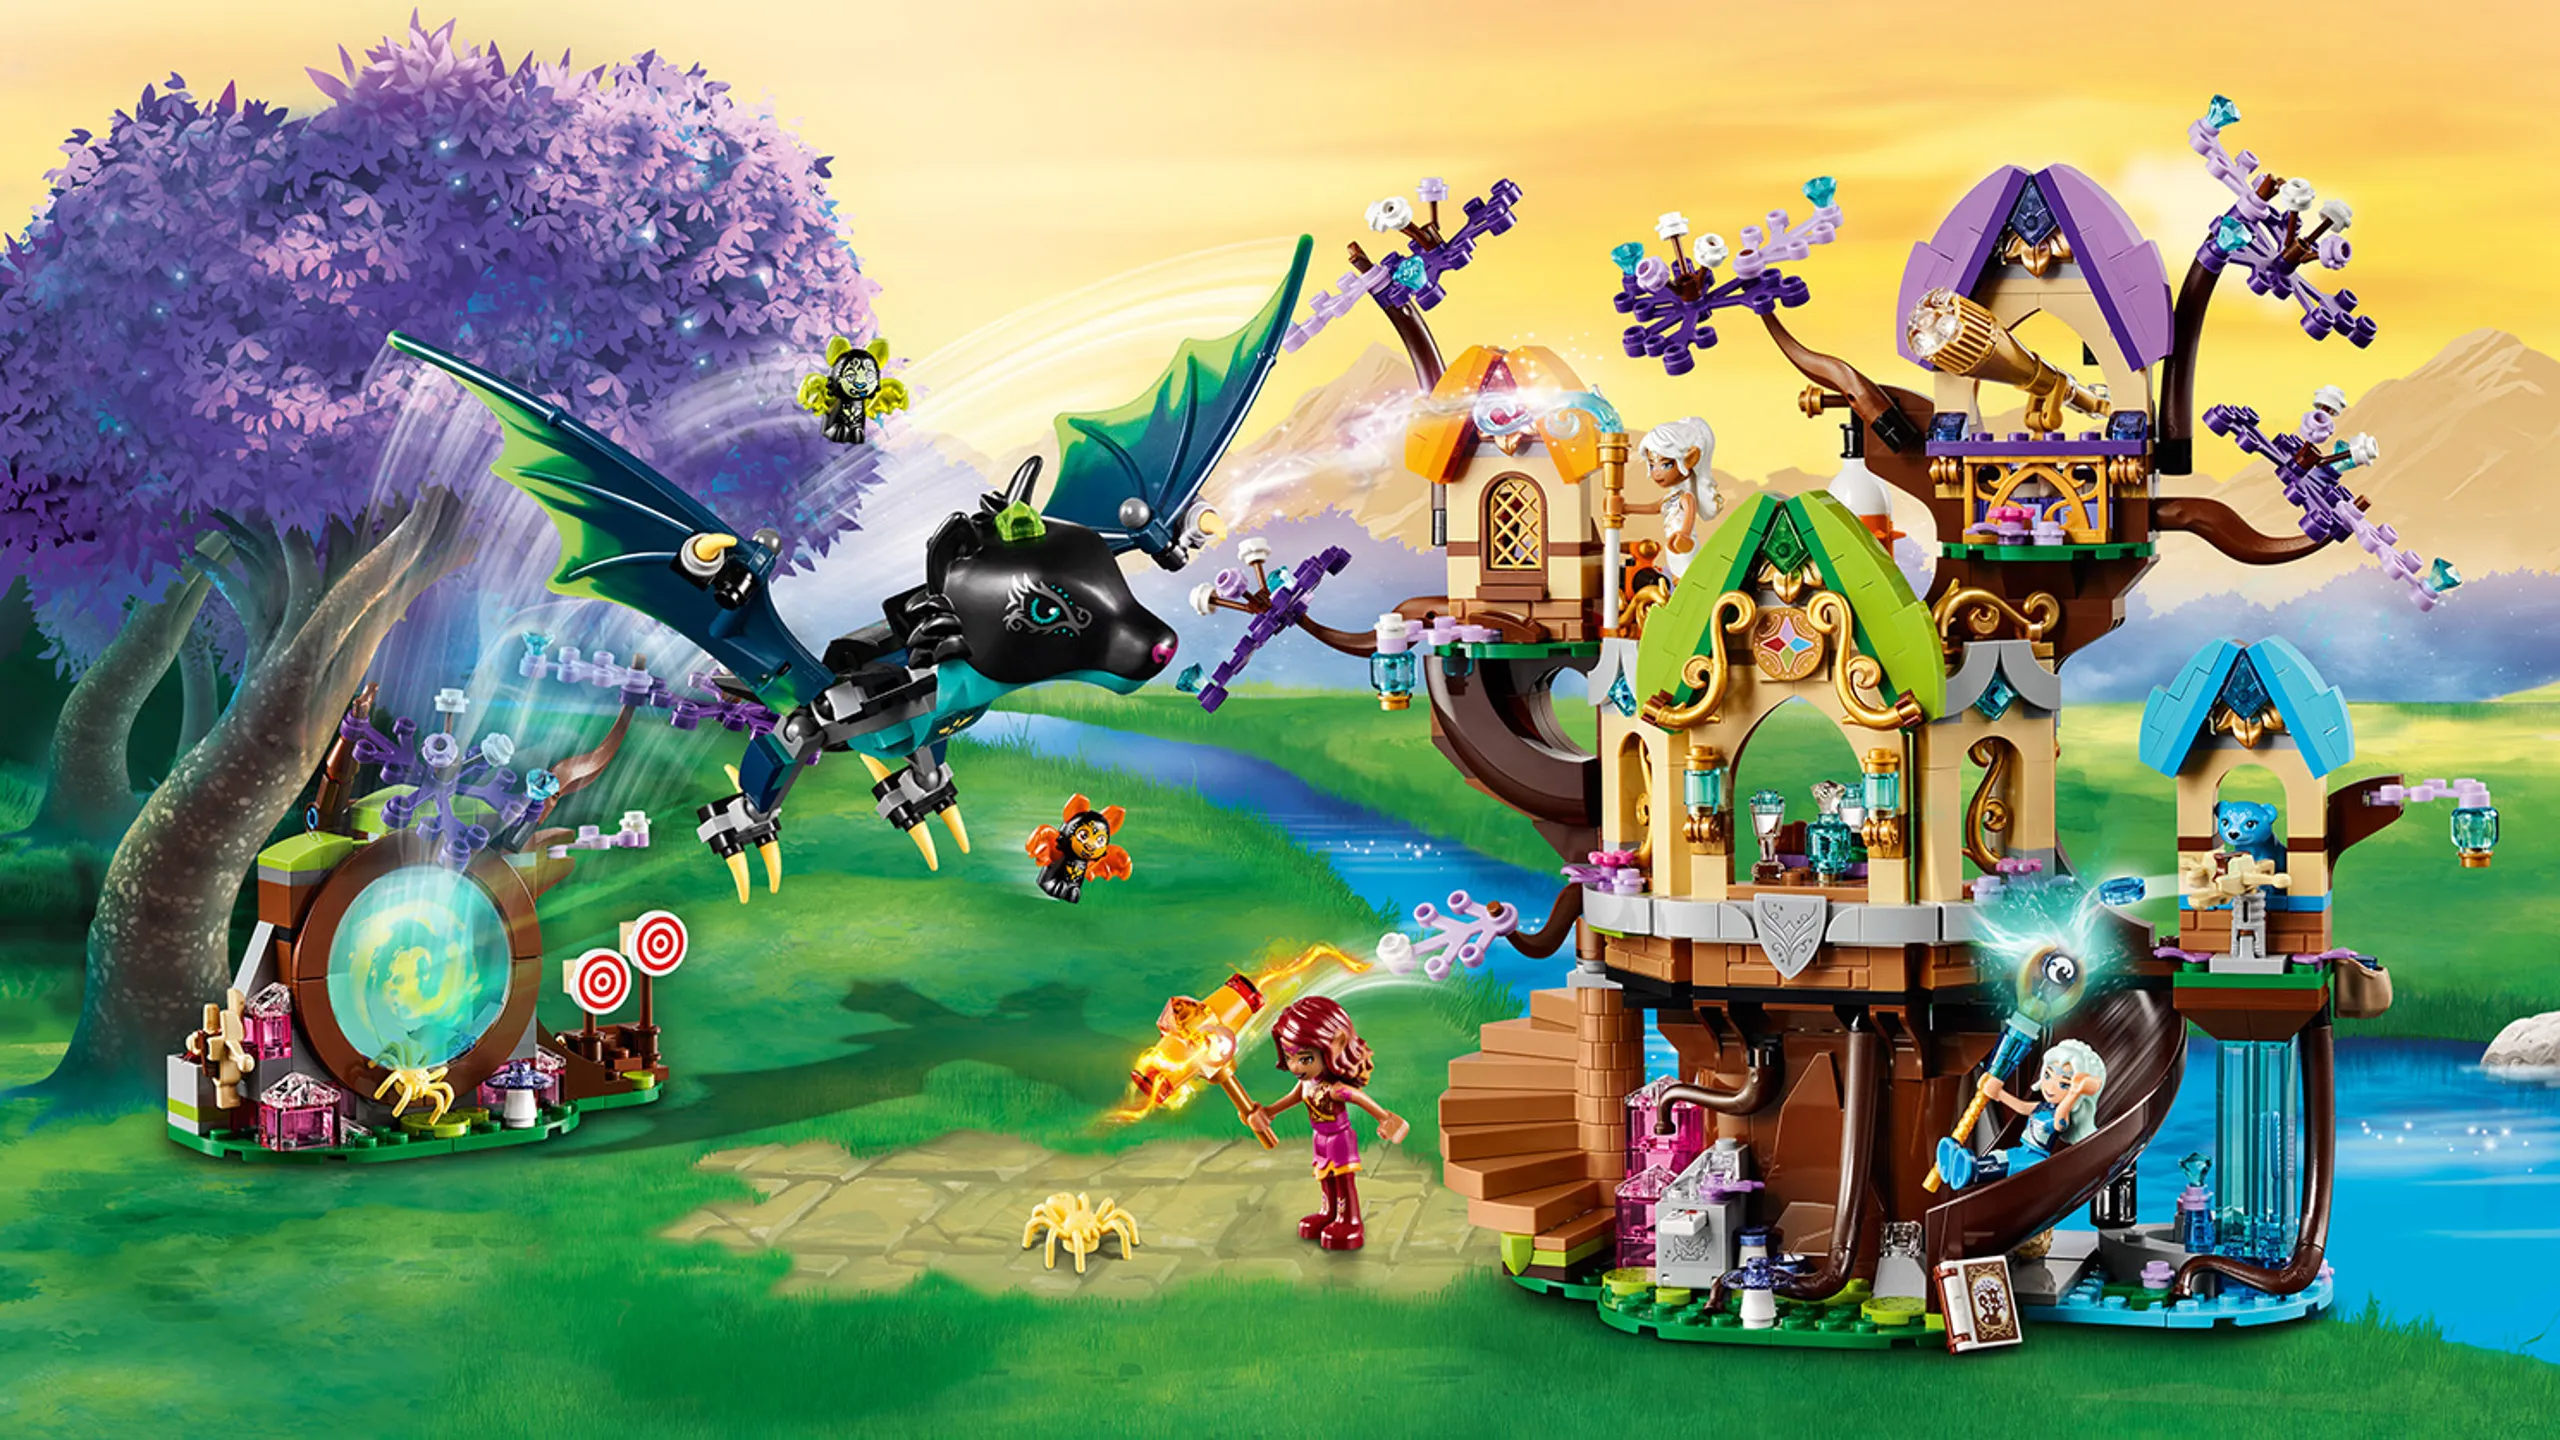 LEGO Elves - 41196 The Elvenstar Tree Bat Attack - A huge bat tries to attack the tree house where the elves can gaze at starts with the telescop, slide down to look at the waterfall, practice with the crossbow and discover a hidden portal.